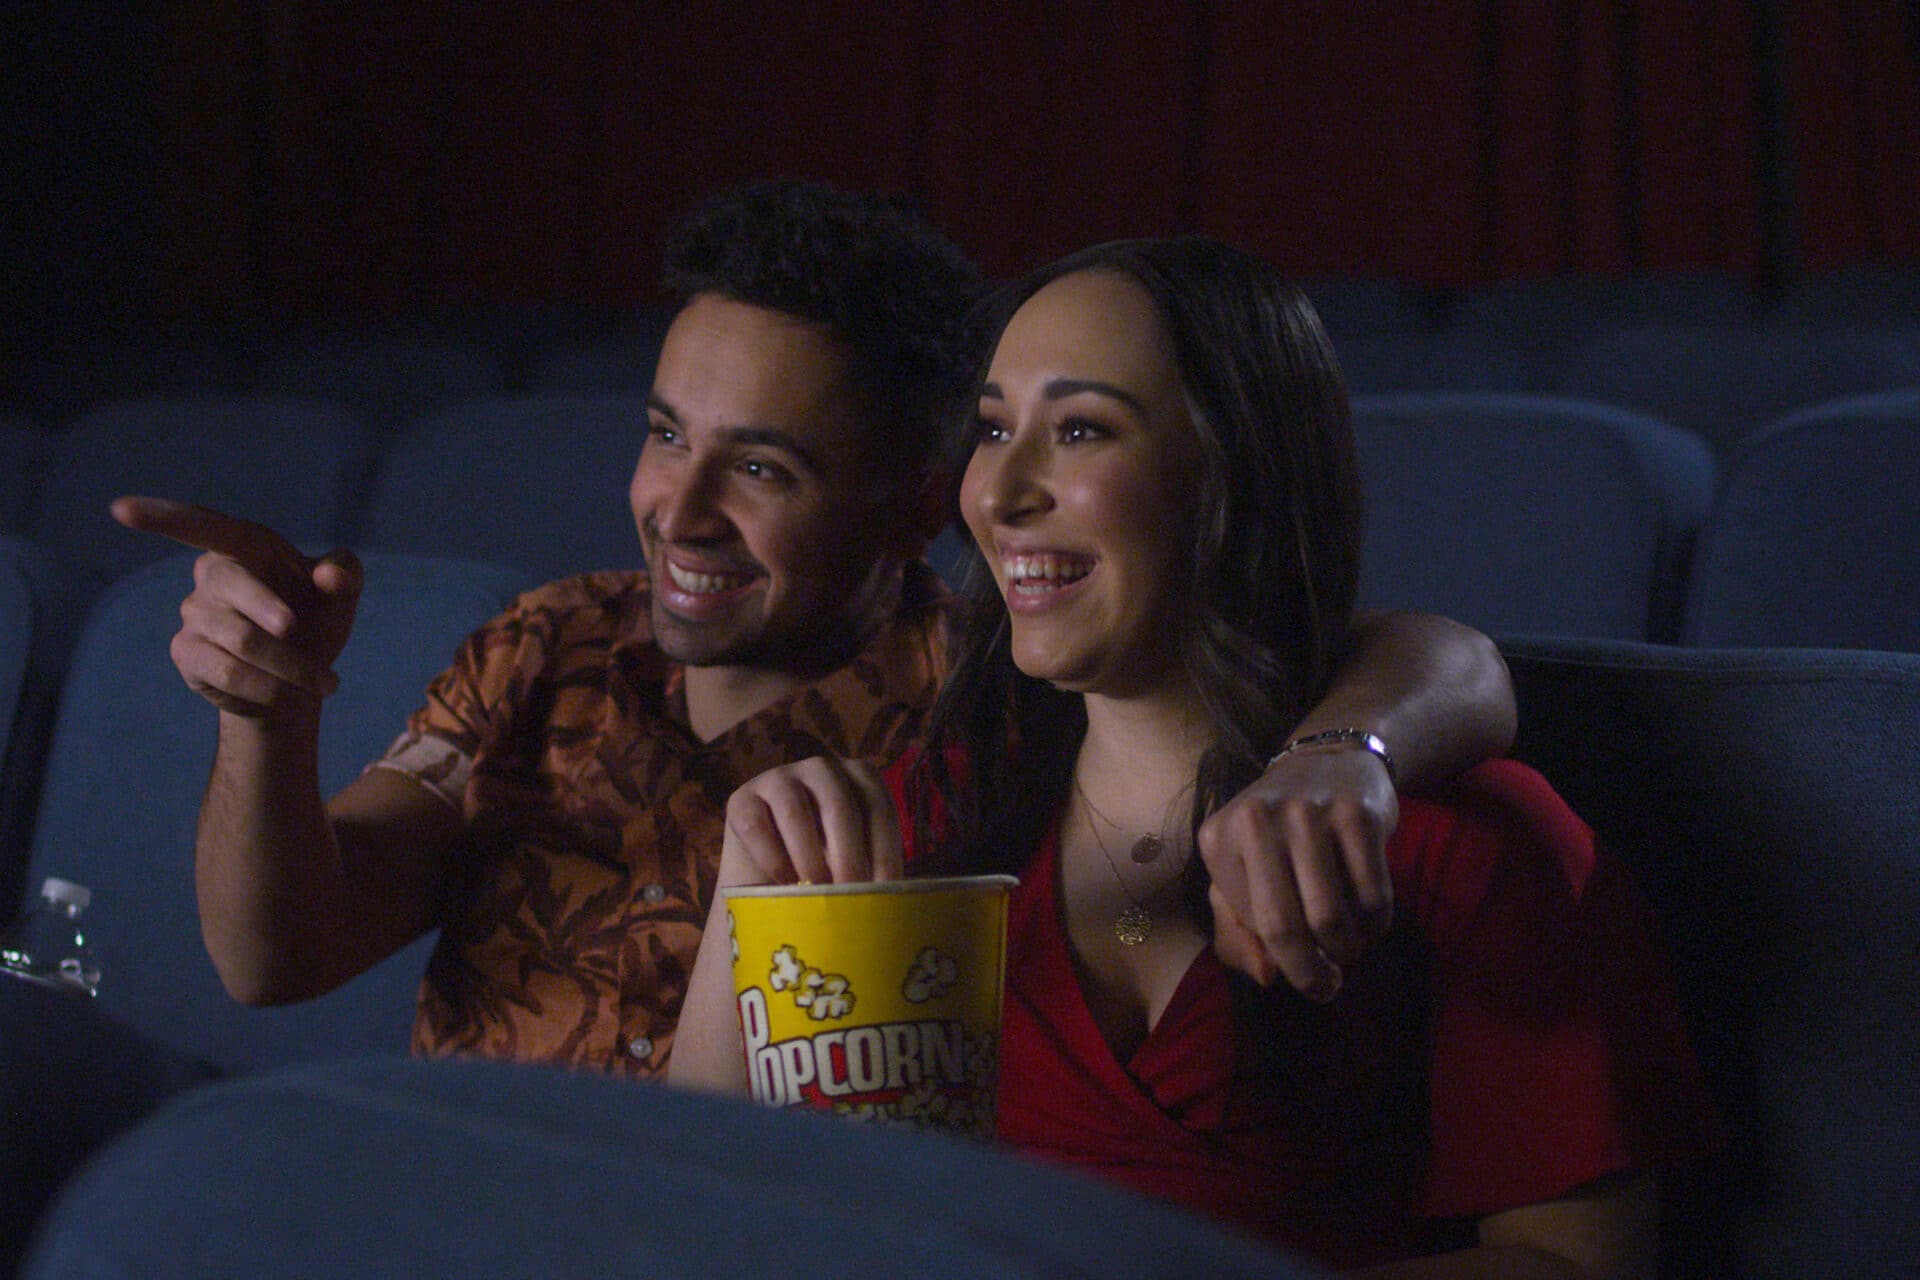 A man and a woman eating popcorn and watching a movie in a theatre. The seats are dark blue, set up in multiple rows.